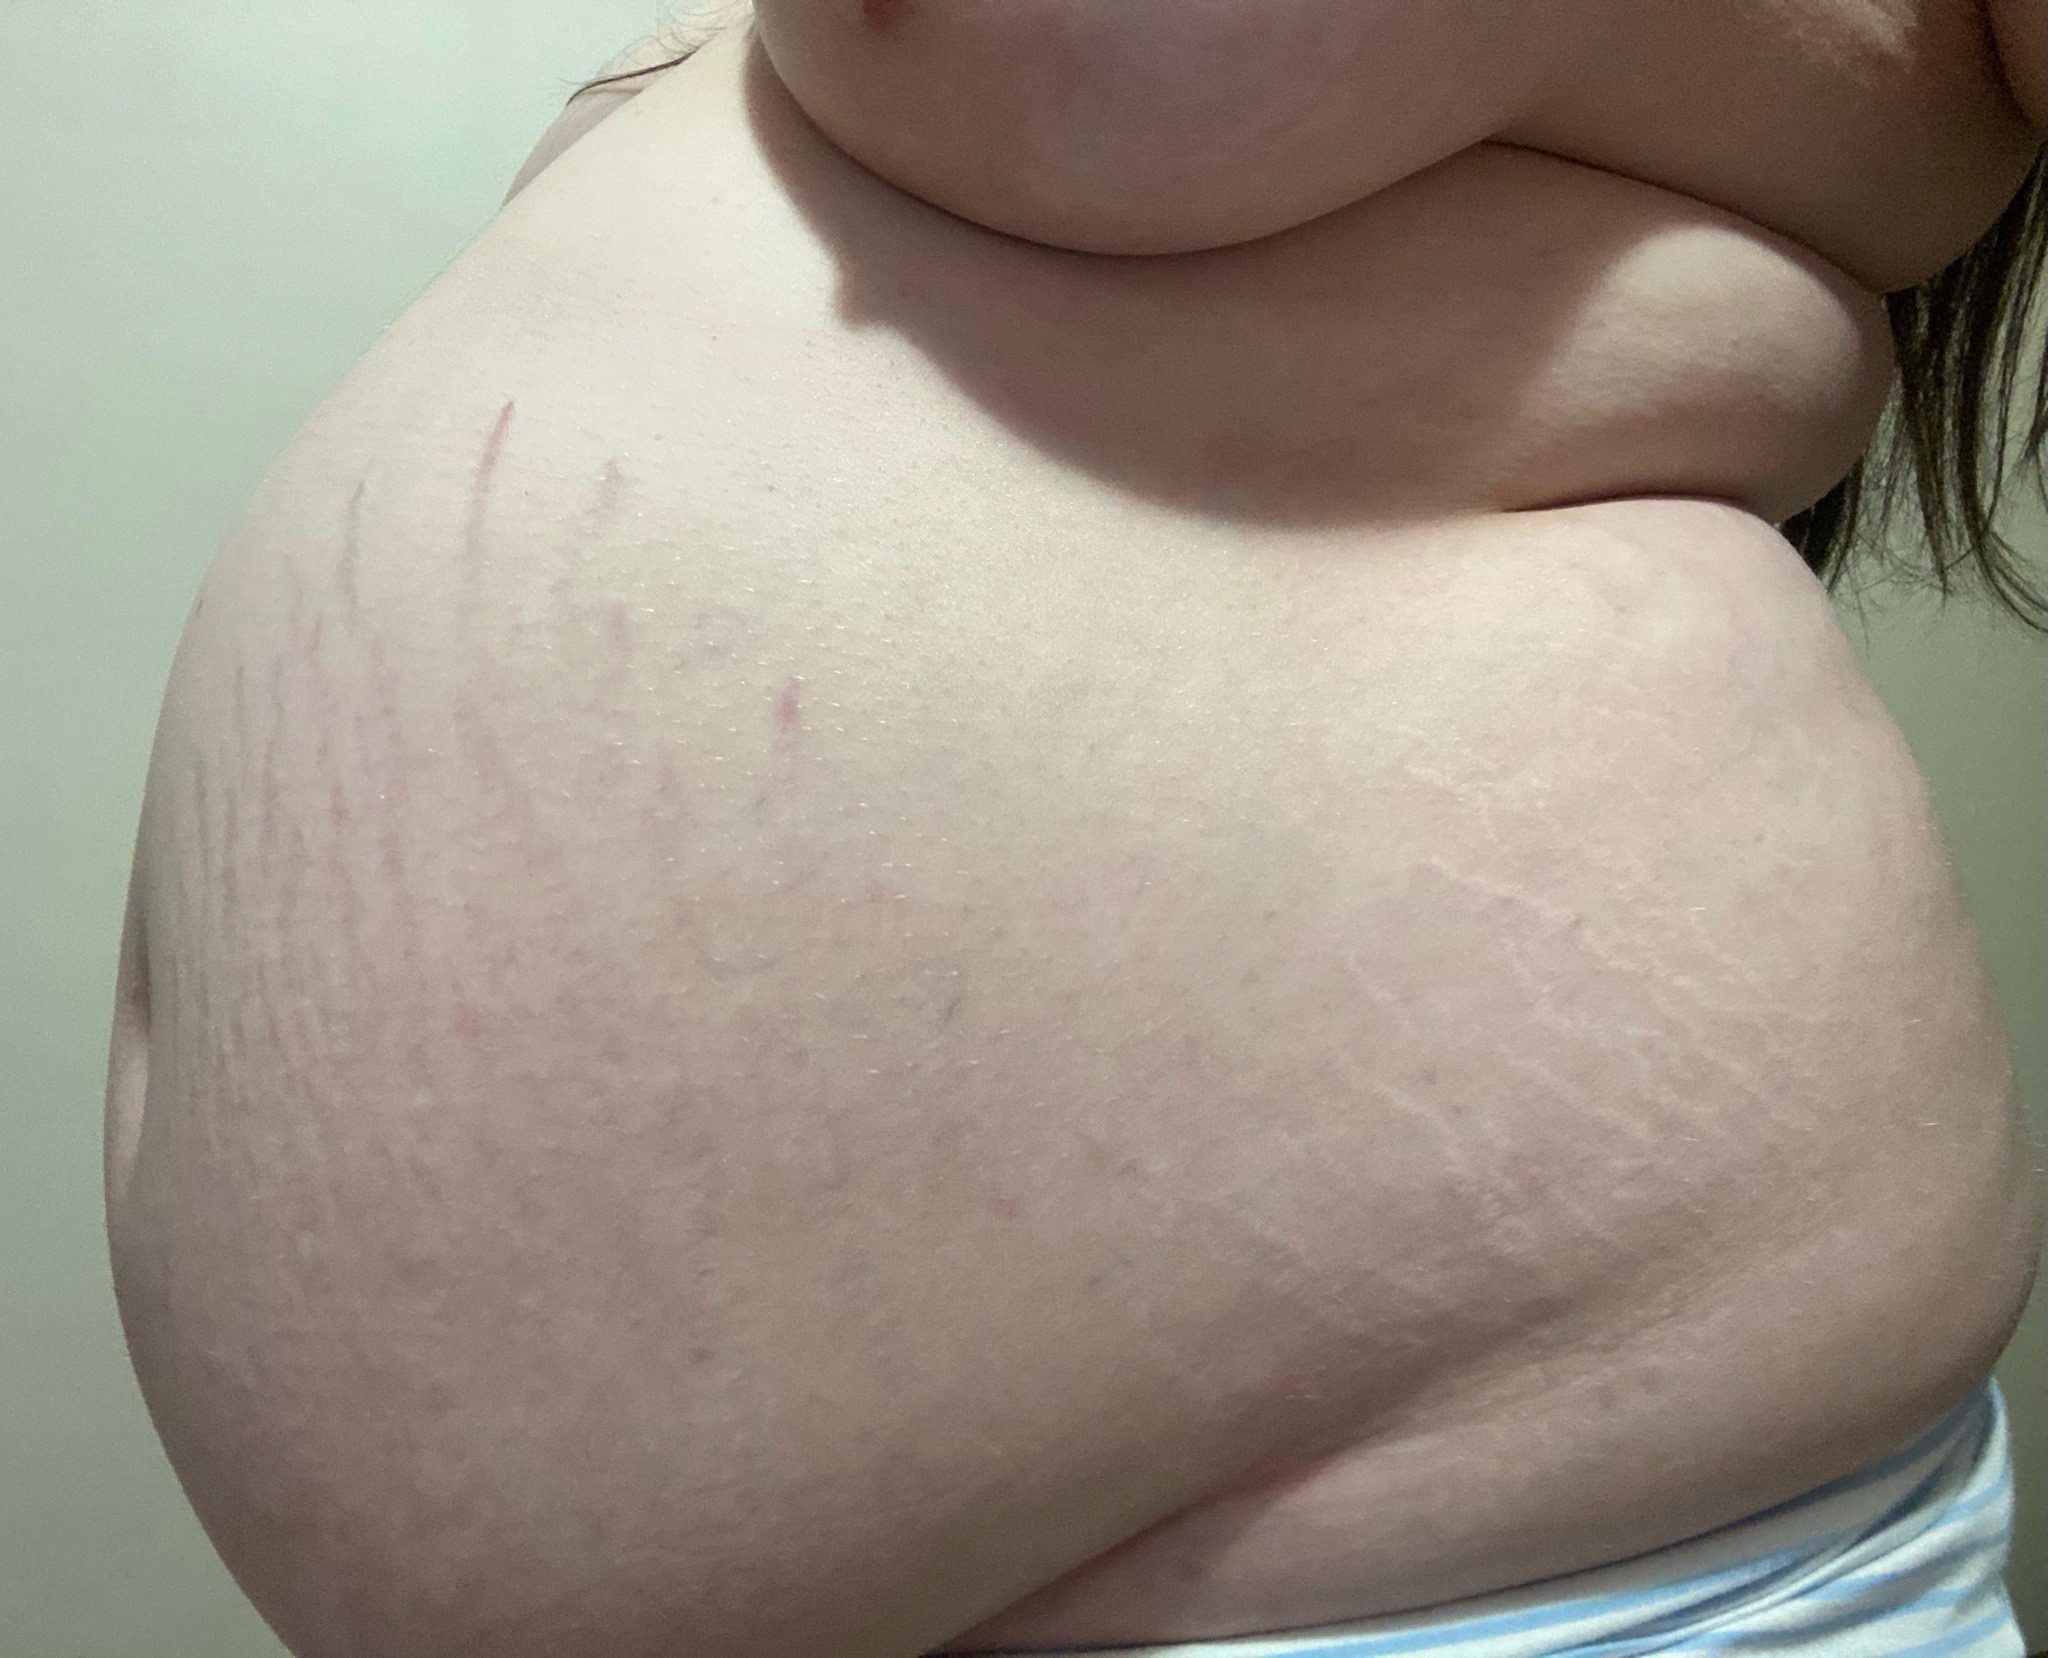 Bloated Bratty Hog porn pictures